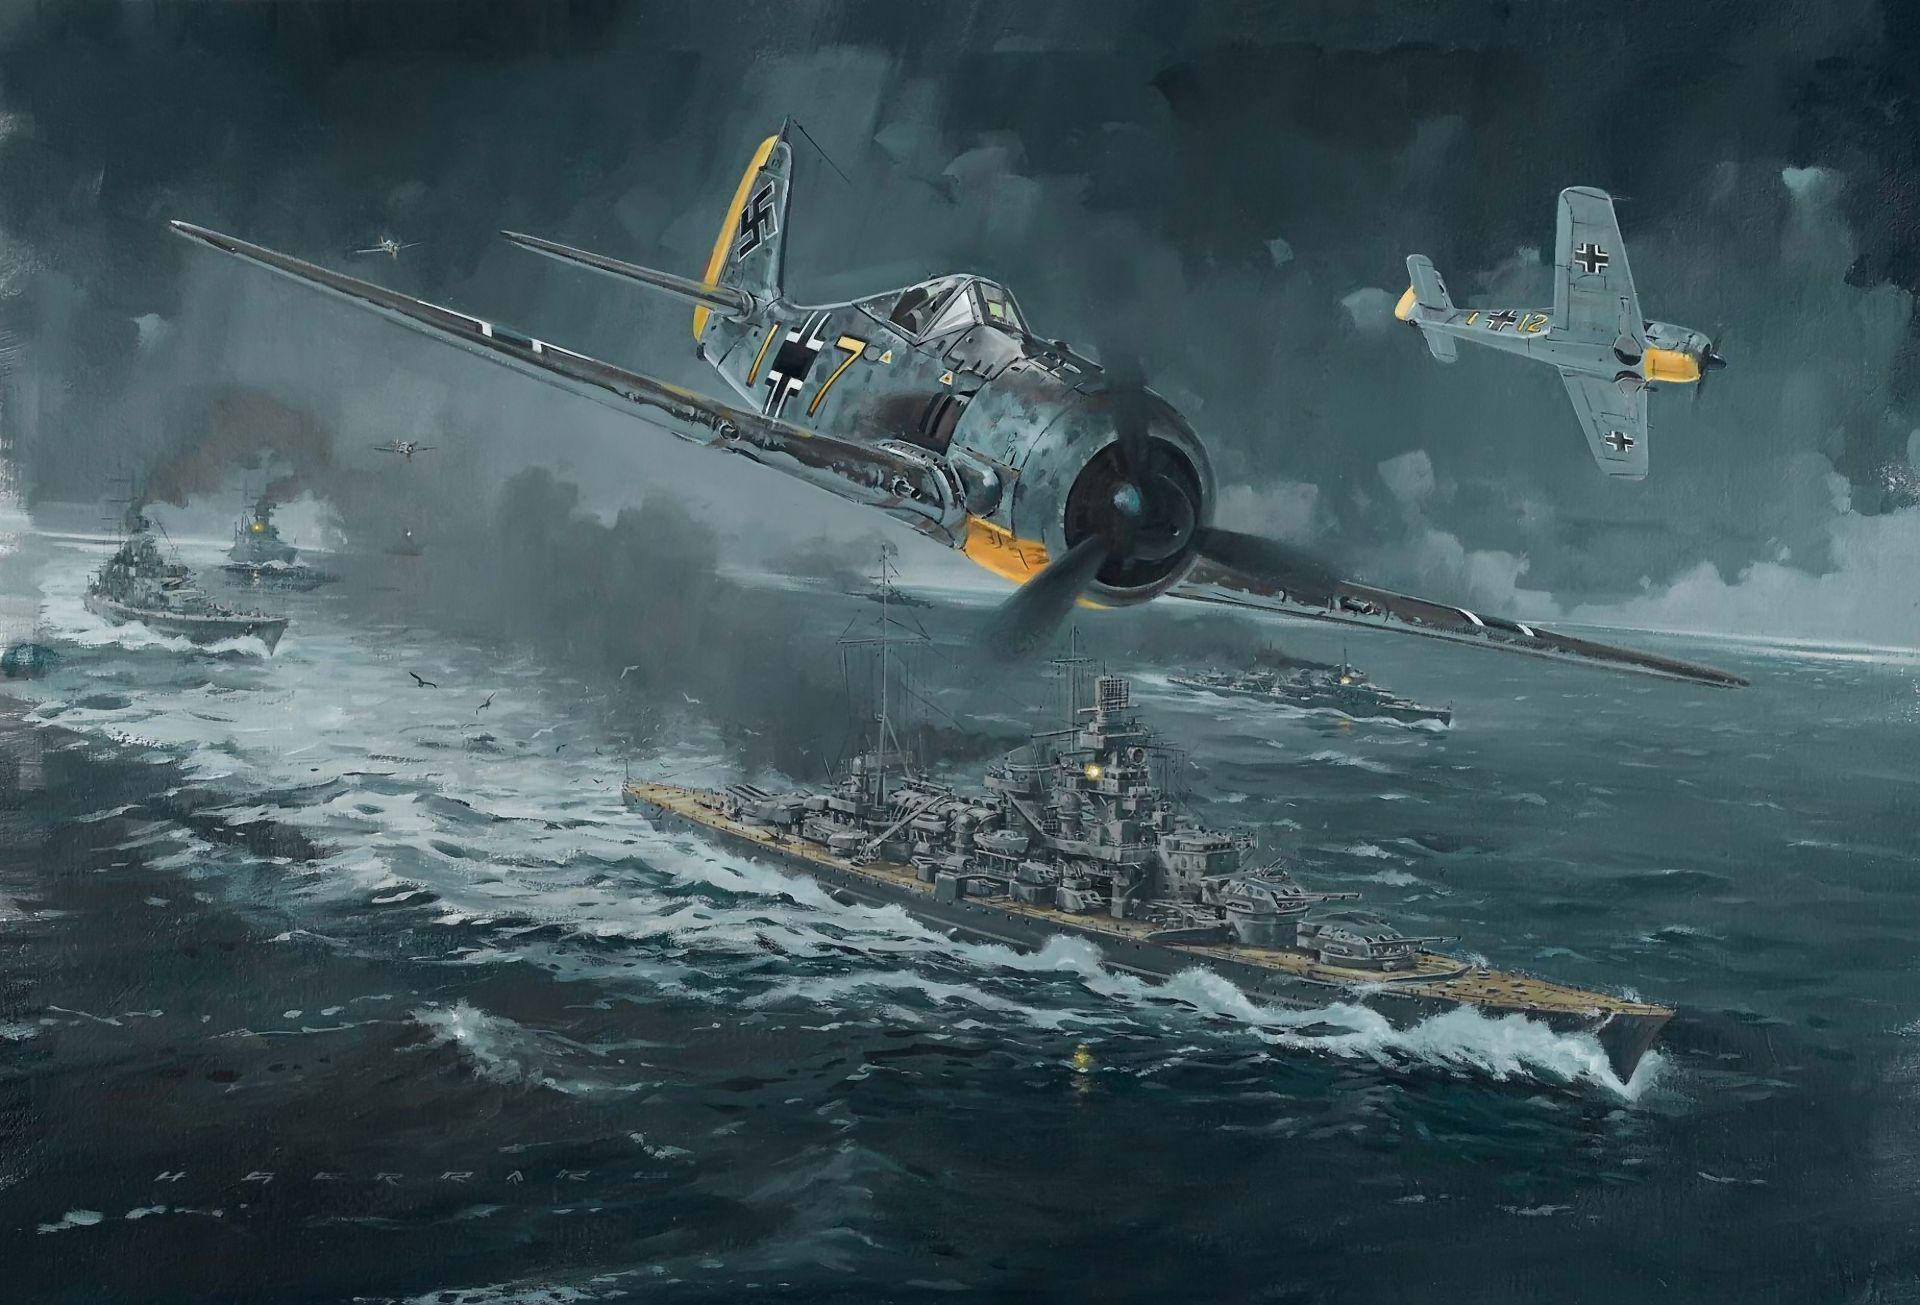 German Ww2 Fighters Over Ships Picture